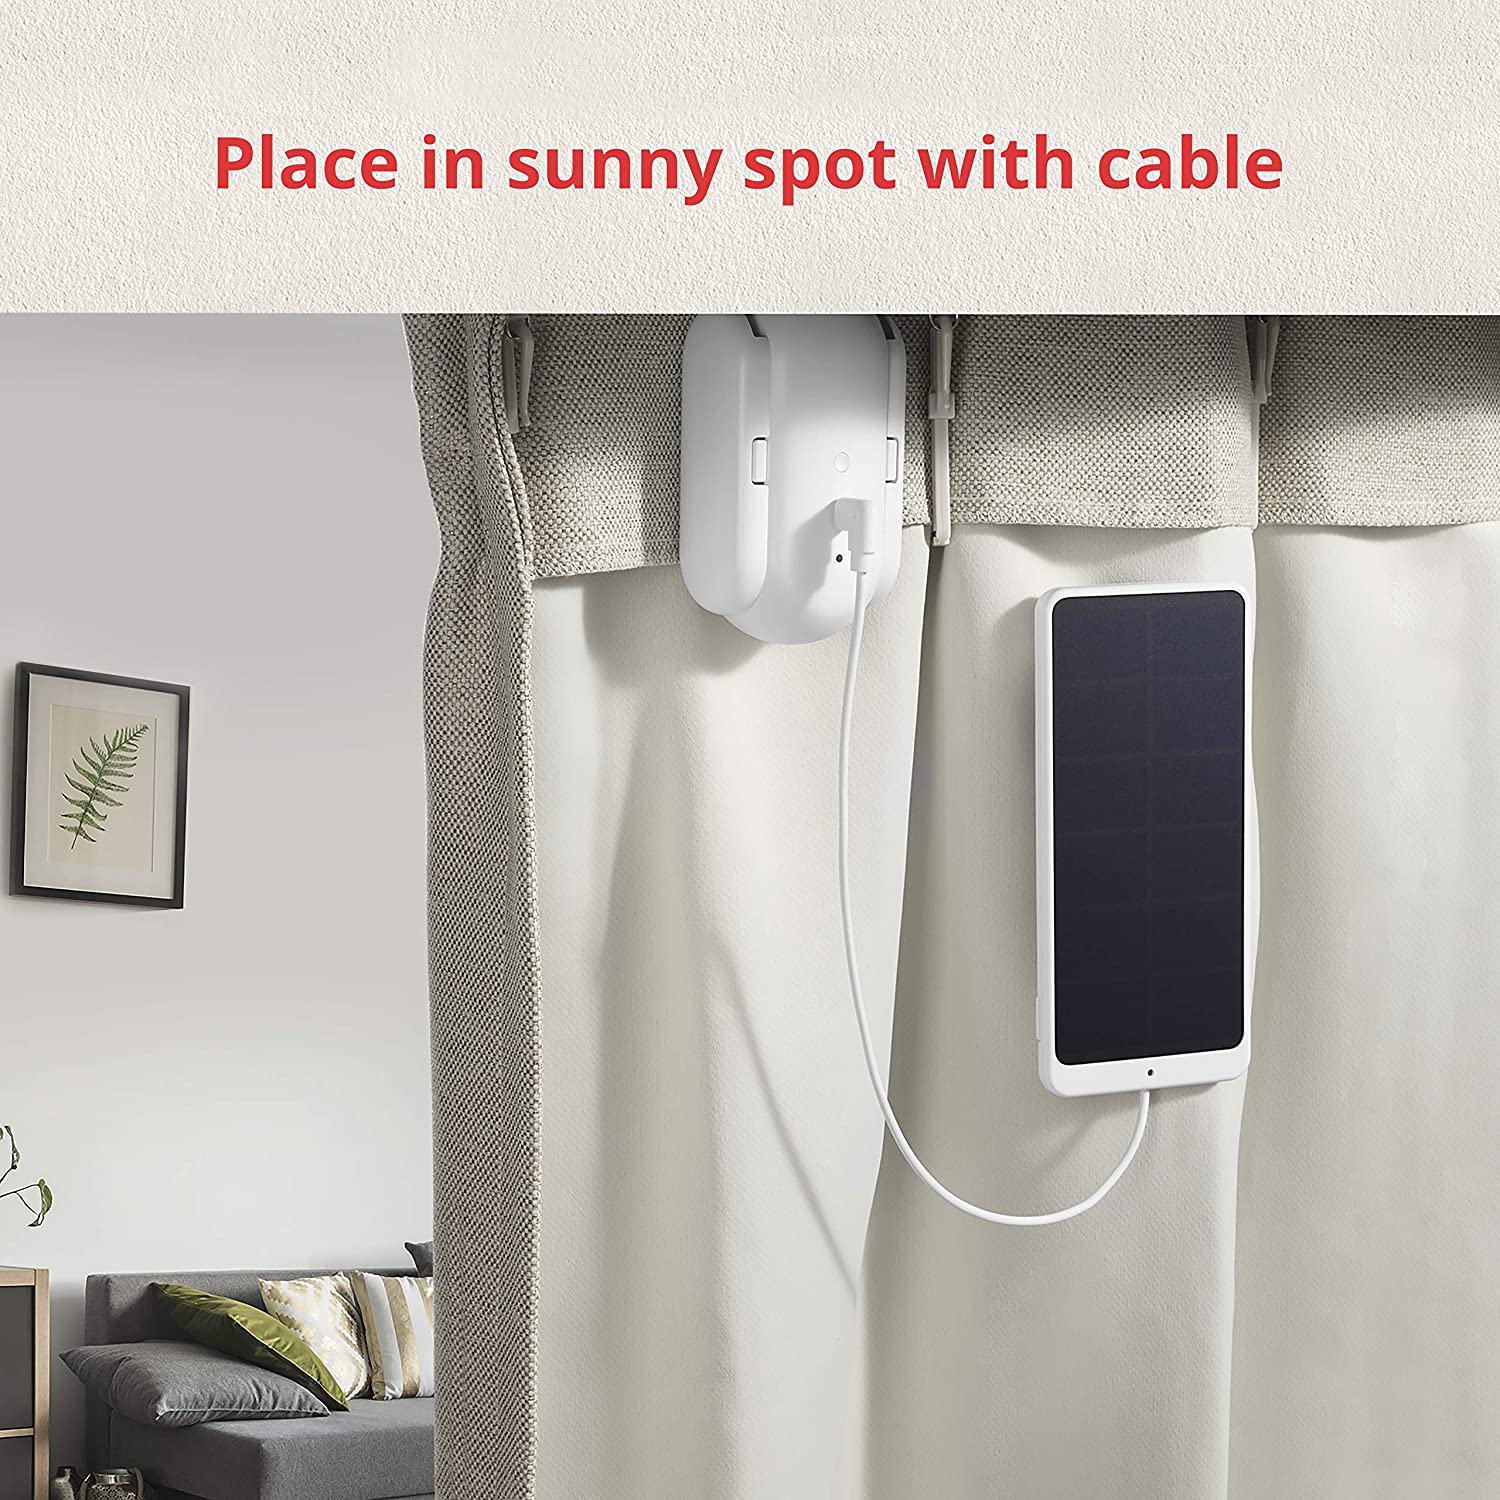 SwitchBot Solar Panel | Charger for SwitchBot Smart Curtain 